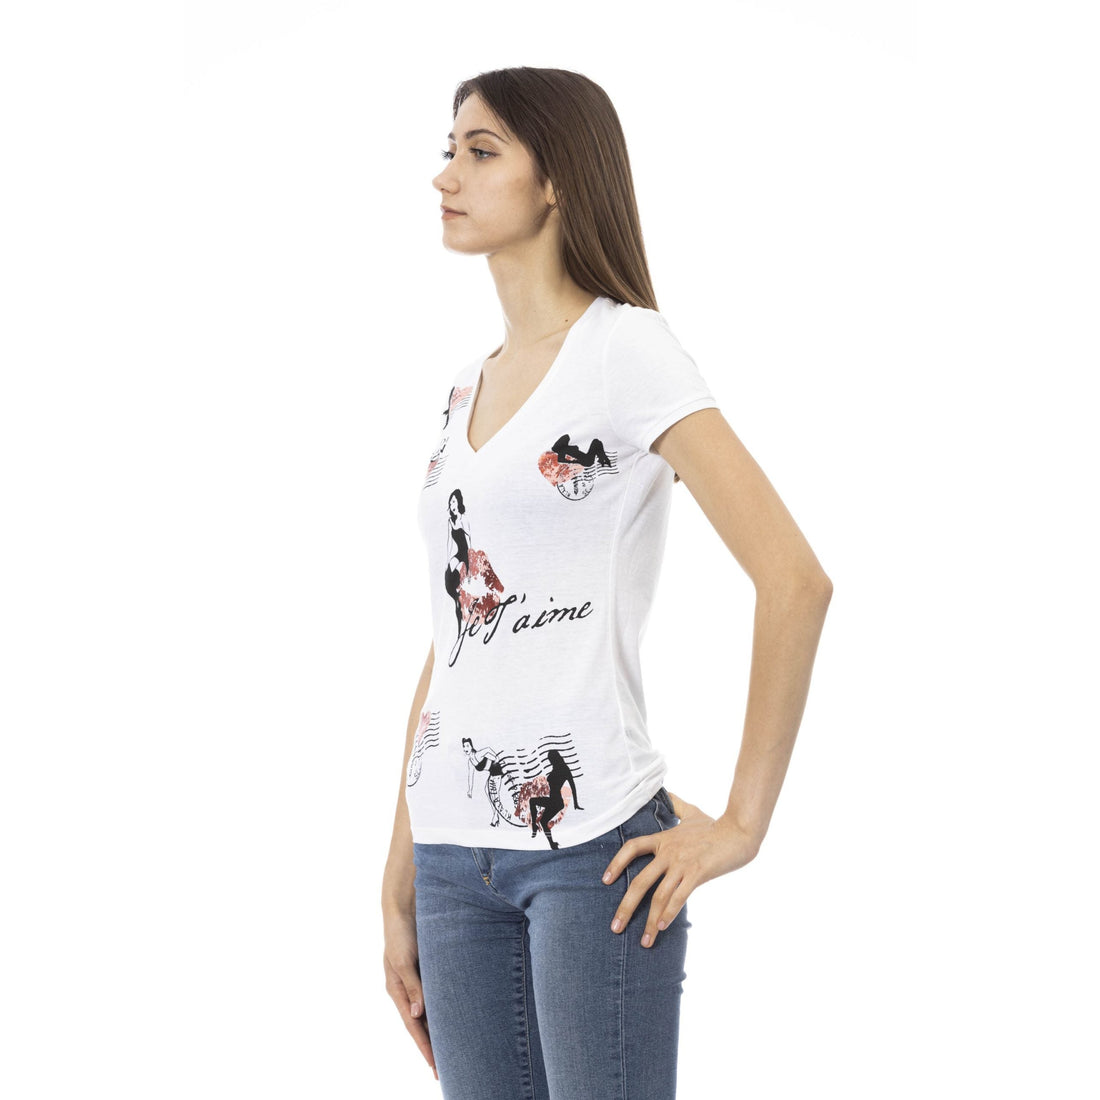 Trussardi Action Chic V-Neck Tee with Graphic Elegance